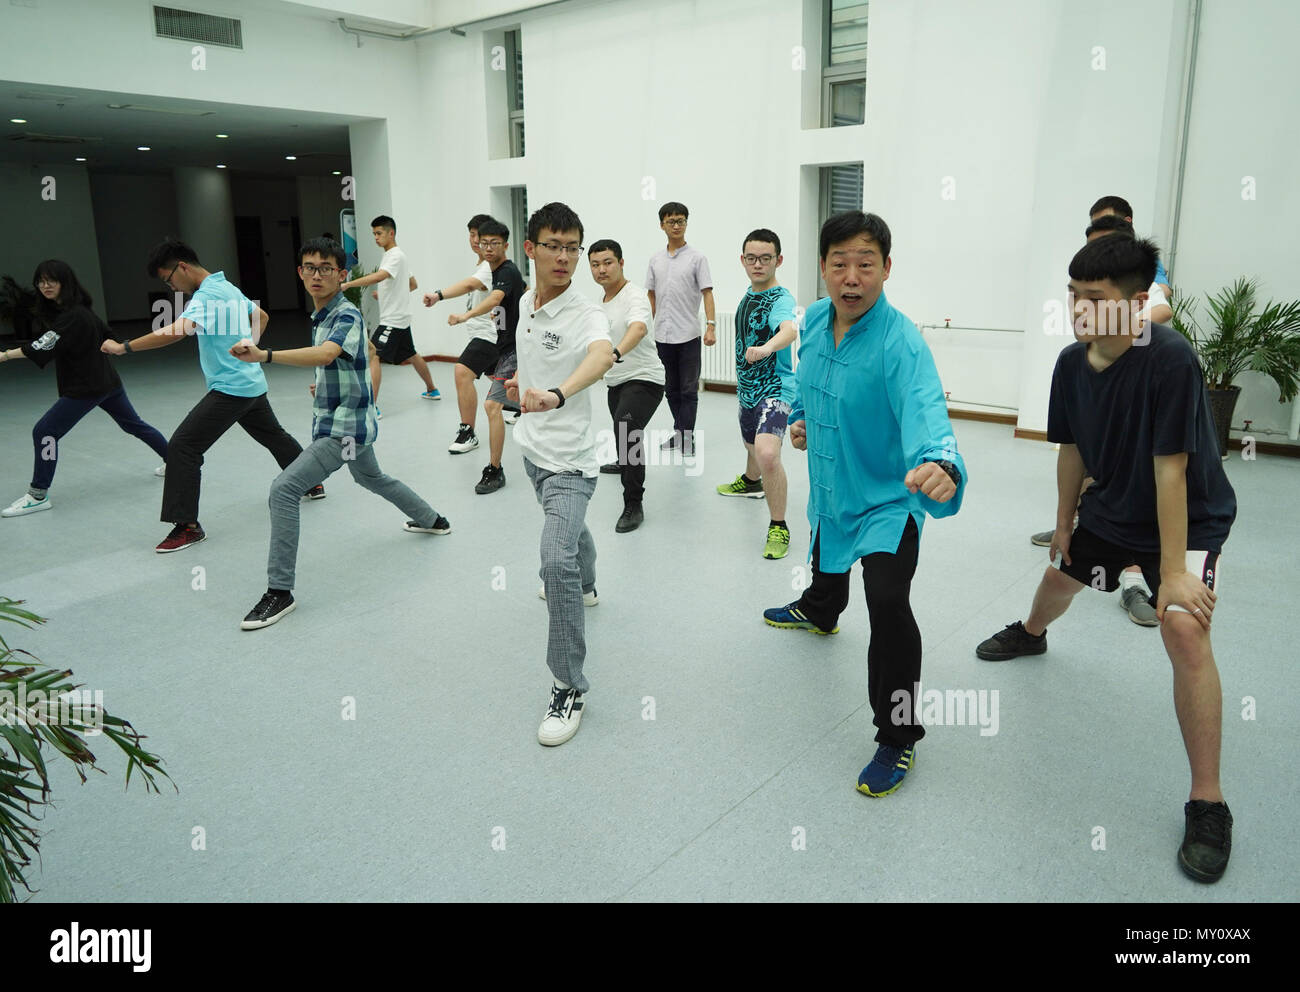 Xi'an, China's Shaanxi Province. 5th June, 2018. Liu Keming, Peking Opera trouper, teaches his students in class at Northwestern Polytechnical University in Xi'an, capital of northwest China's Shaanxi Province, June 5, 2018. The university started running courses of Peking Opera in September last year to promote traditional opera among students. Peking Opera, listed by UNESCO as an intangible cultural heritage, is the most famous among hundreds of forms of local opera in China. Credit: Shao Rui/Xinhua/Alamy Live News Stock Photo